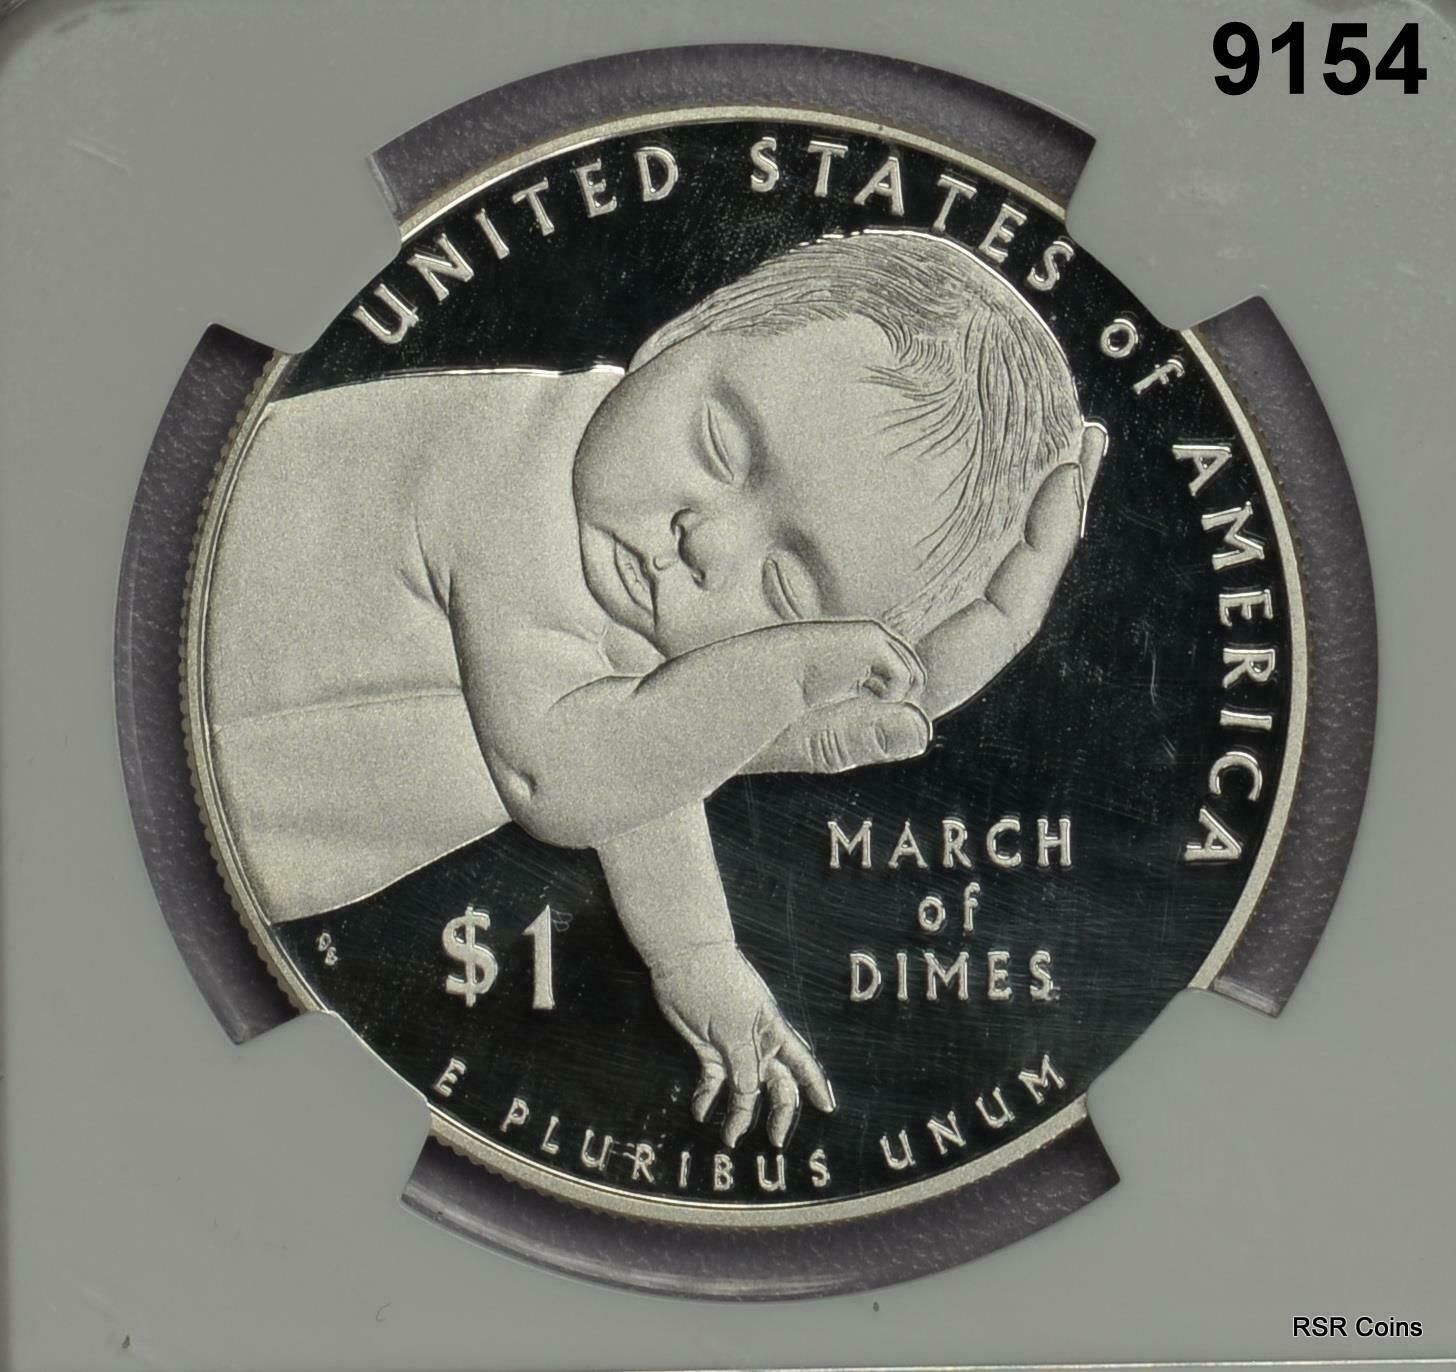 2015 W SILVER DOLLAR MARCH OF DIMES COMMEM NGC CERTIFIED PF70 ULTRA CAMEO#9154